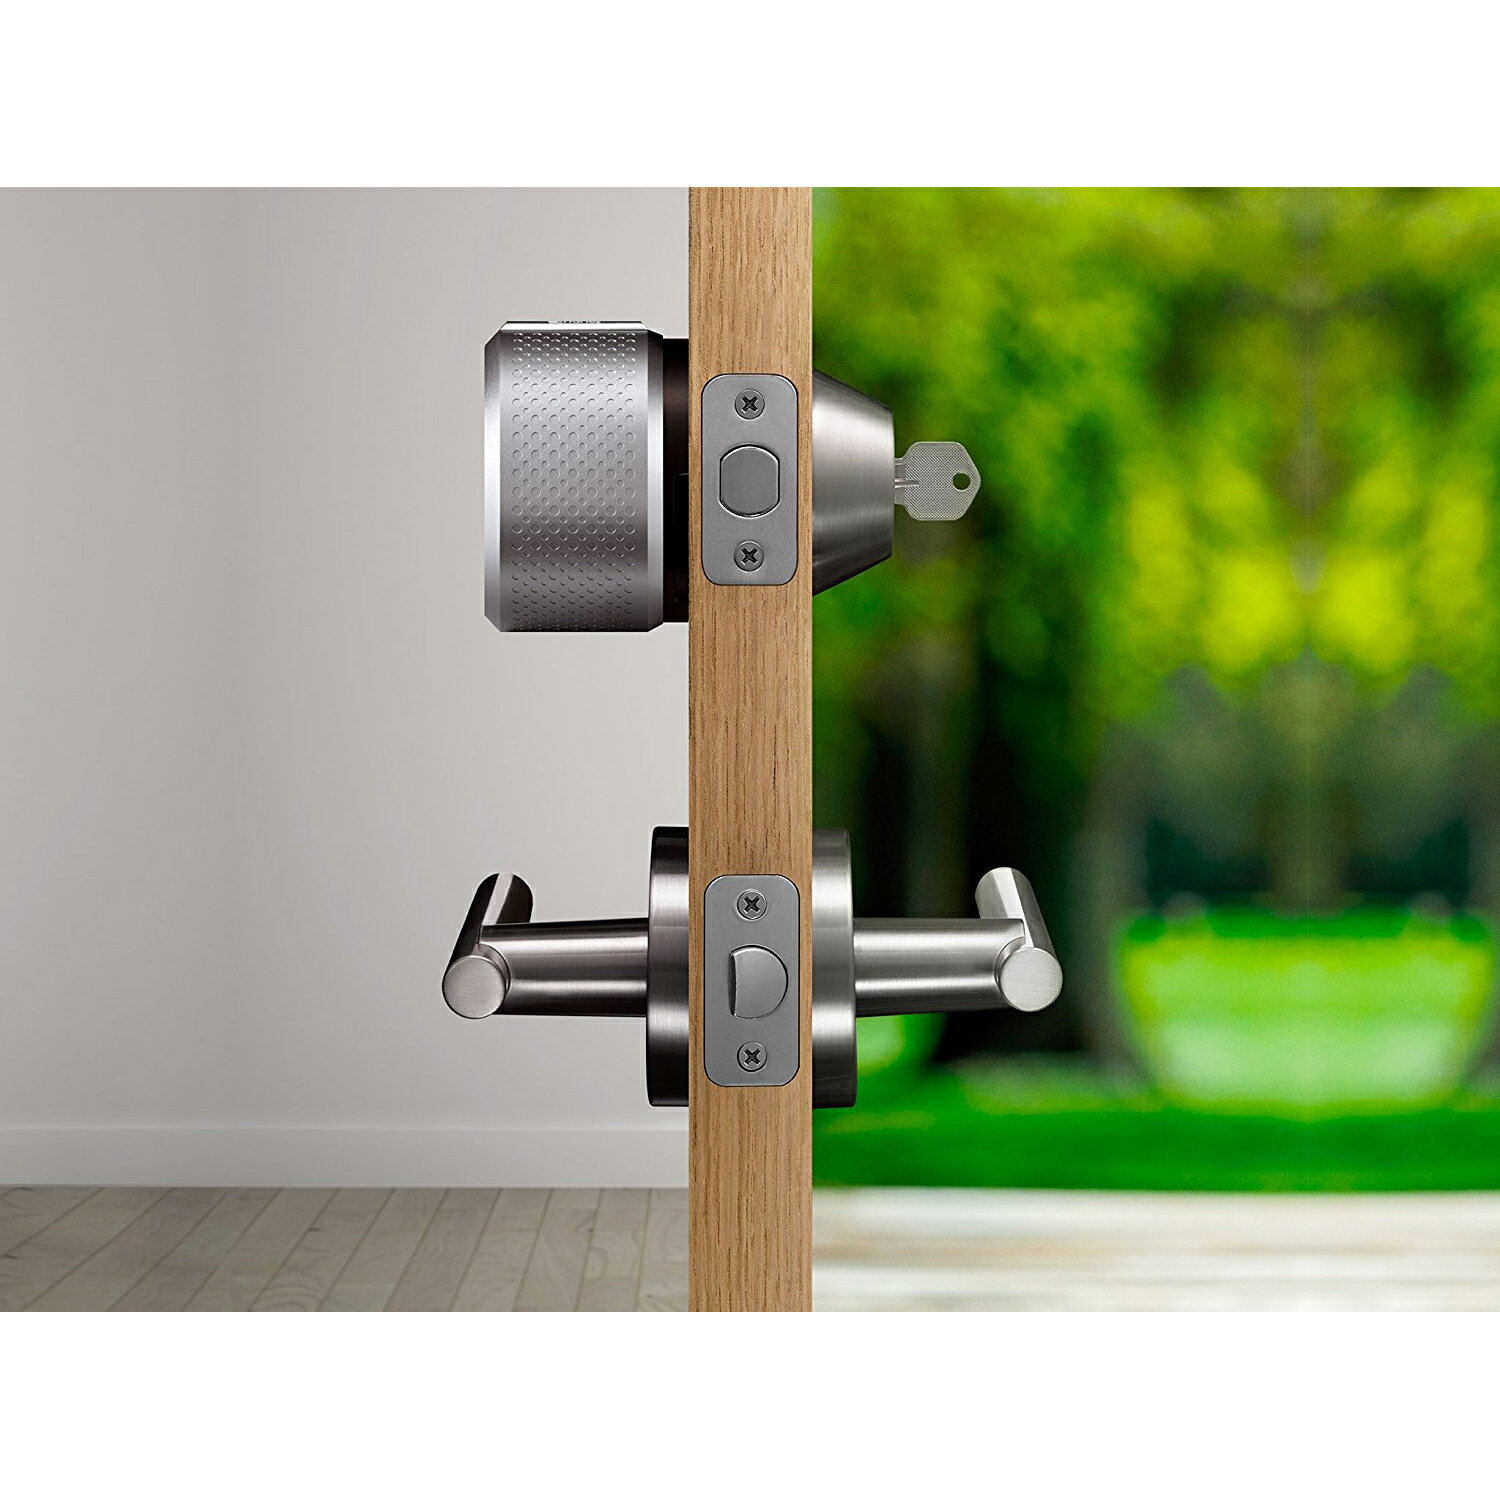 ProElectronics Distributing Inc. August Smart Lock Pro + Connect 3rd